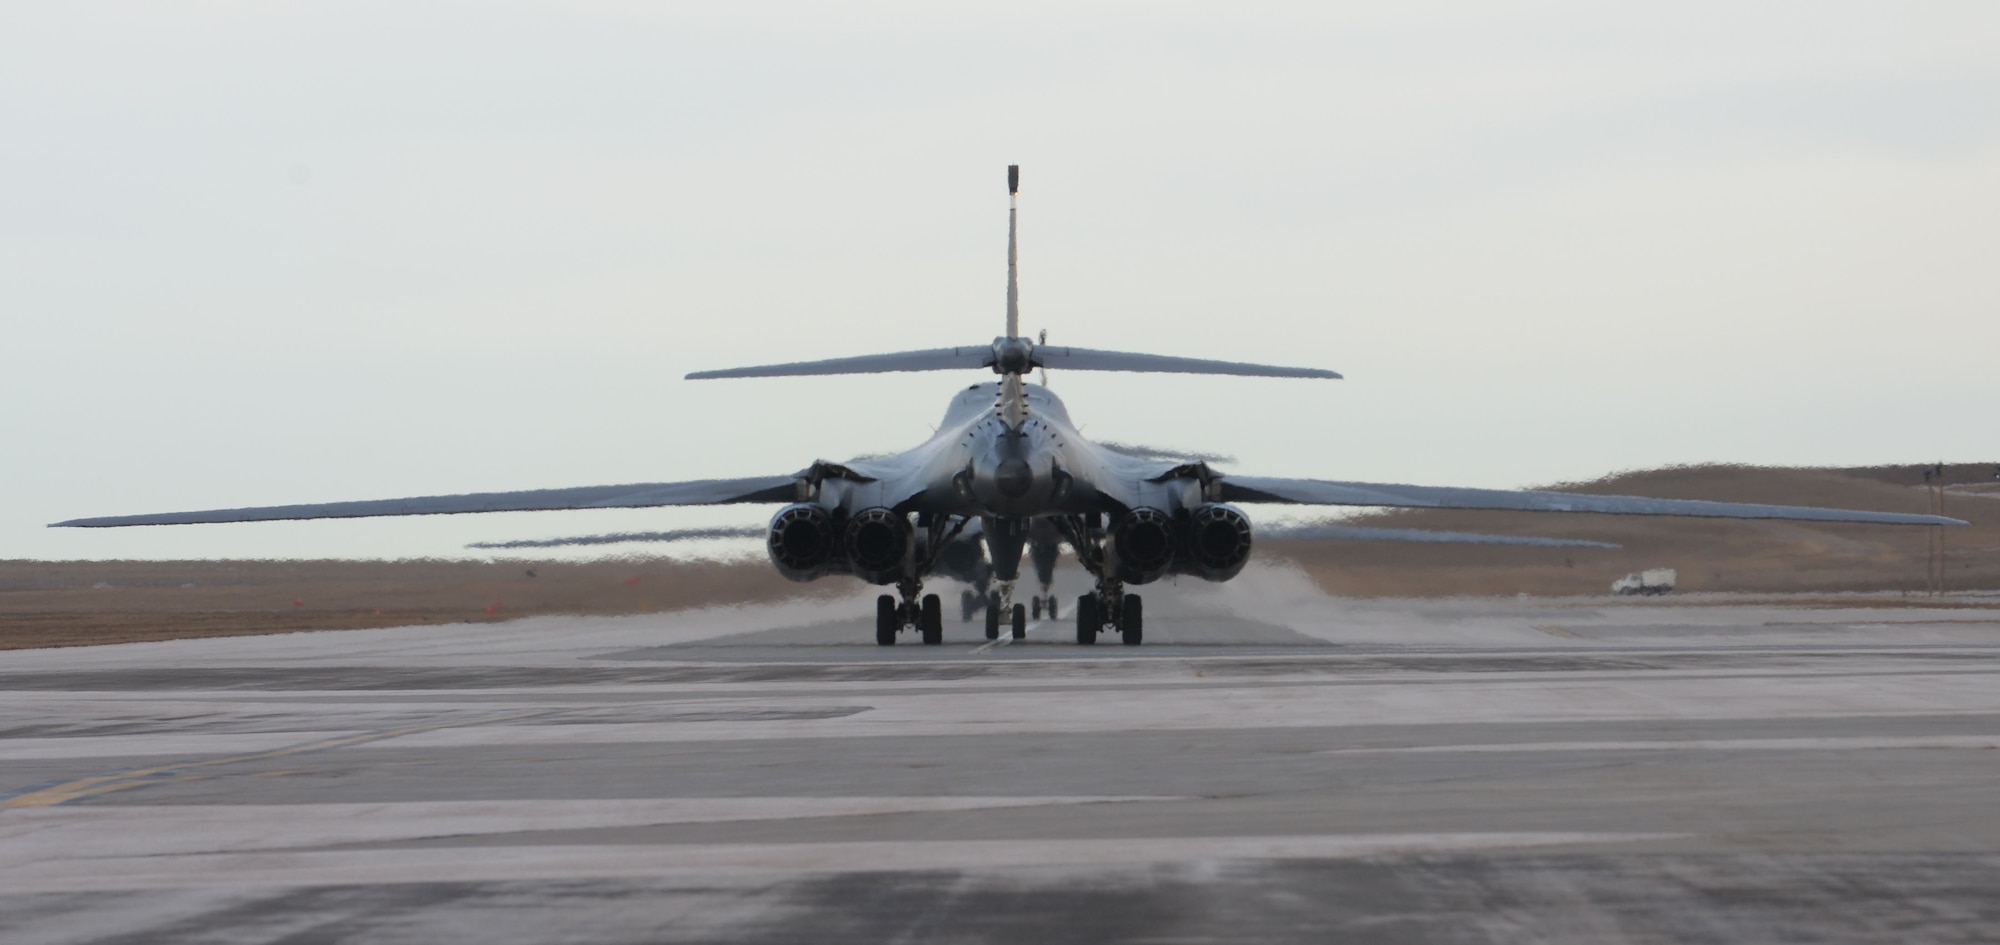 B-1 bombers returning from Andersen Air Force Base, Guam, taxi down the runway at Ellsworth Air Force Base, S.D., Jan. 25, 2018. B-1 bombers from the 37th Bomb Squadron and Airmen from the 37th Aircraft Maintenance Unit were deployed to Andersen AFB, to take part in the Continuous Bomber Presence mission. (U.S. Air Force photo by Airman 1st Class Nicolas Z. Erwin)